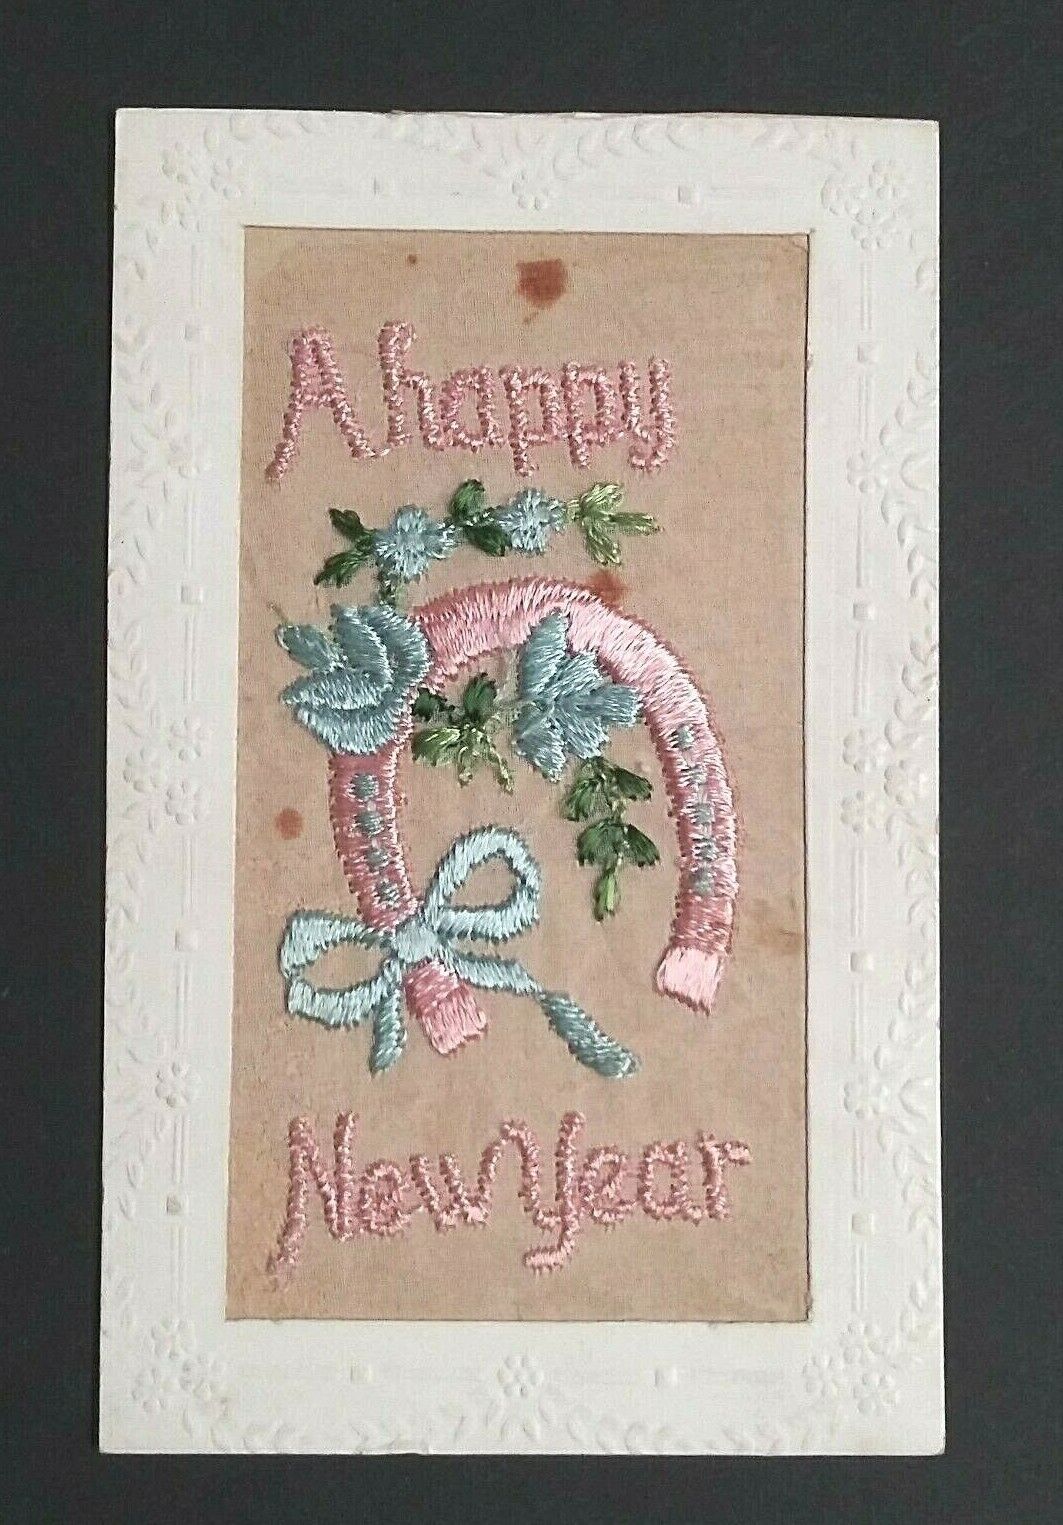 A Happy New Year Embroidered Cloth Horseshoe Antique Postcard Bleco c1910s